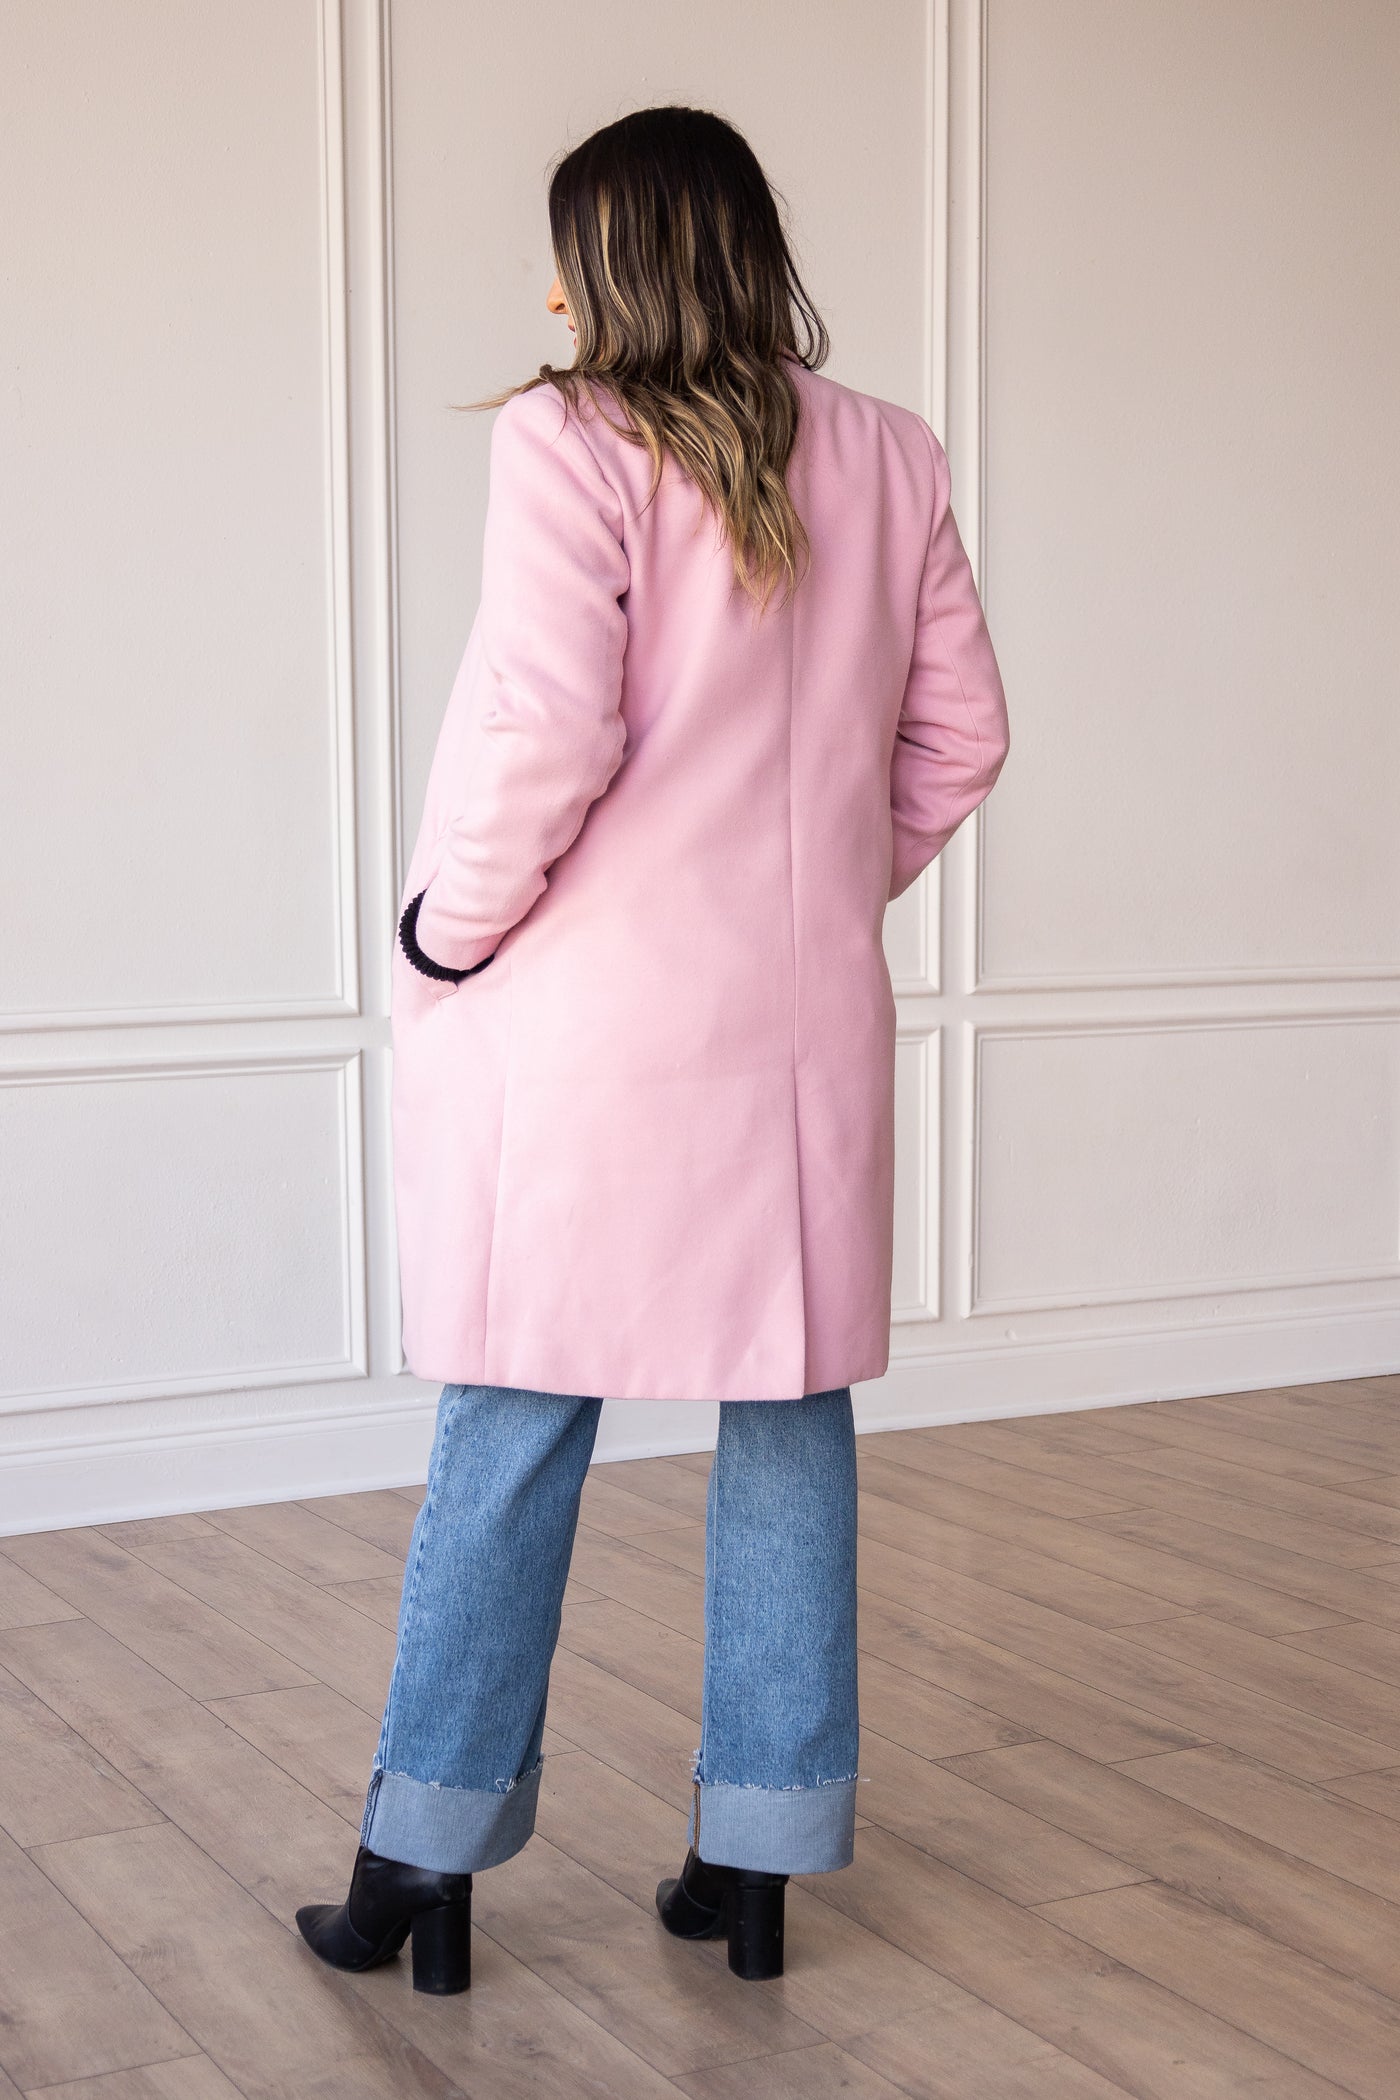 The Phoebe Coat in Pink